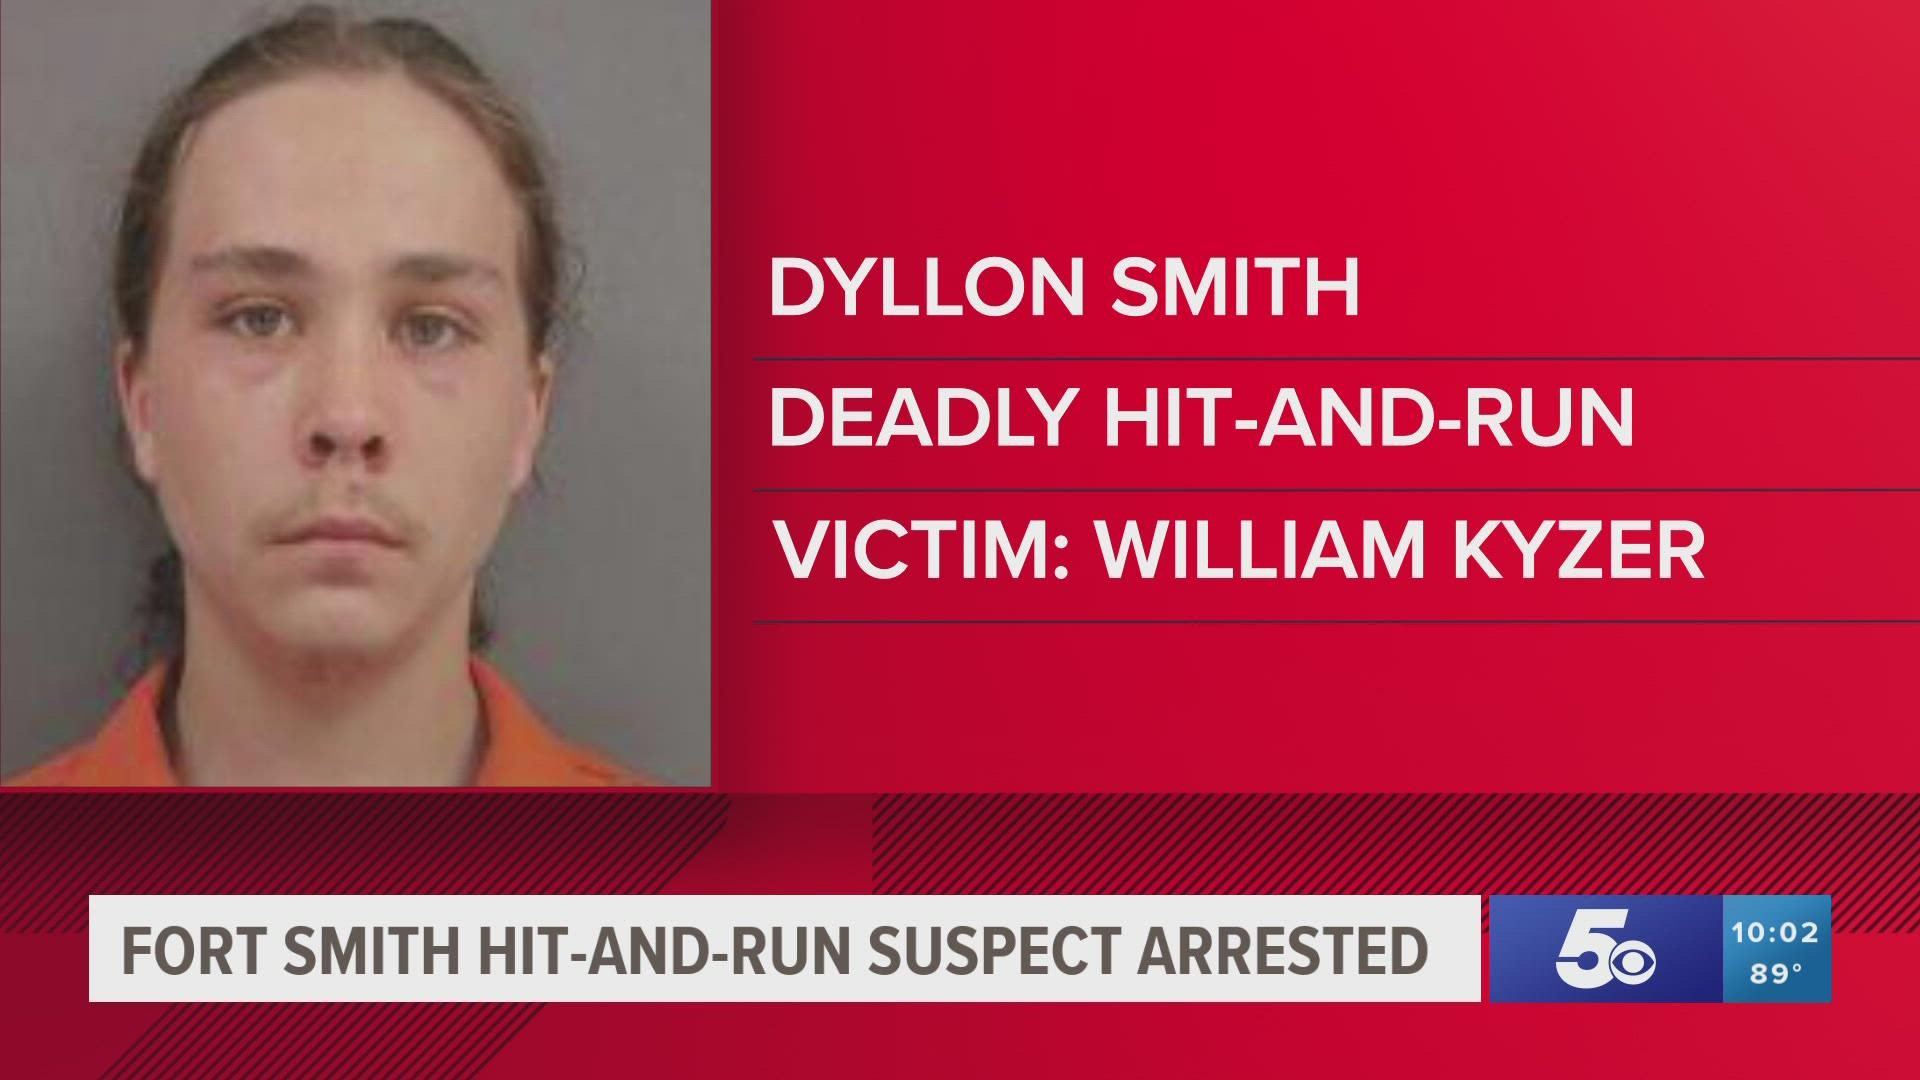 Police say 18-year-old Dyllon Smith was arrested for the hit-and-run crash in Fort Smith along South R Street and Jenny Lind Road that killed William Kyzer.